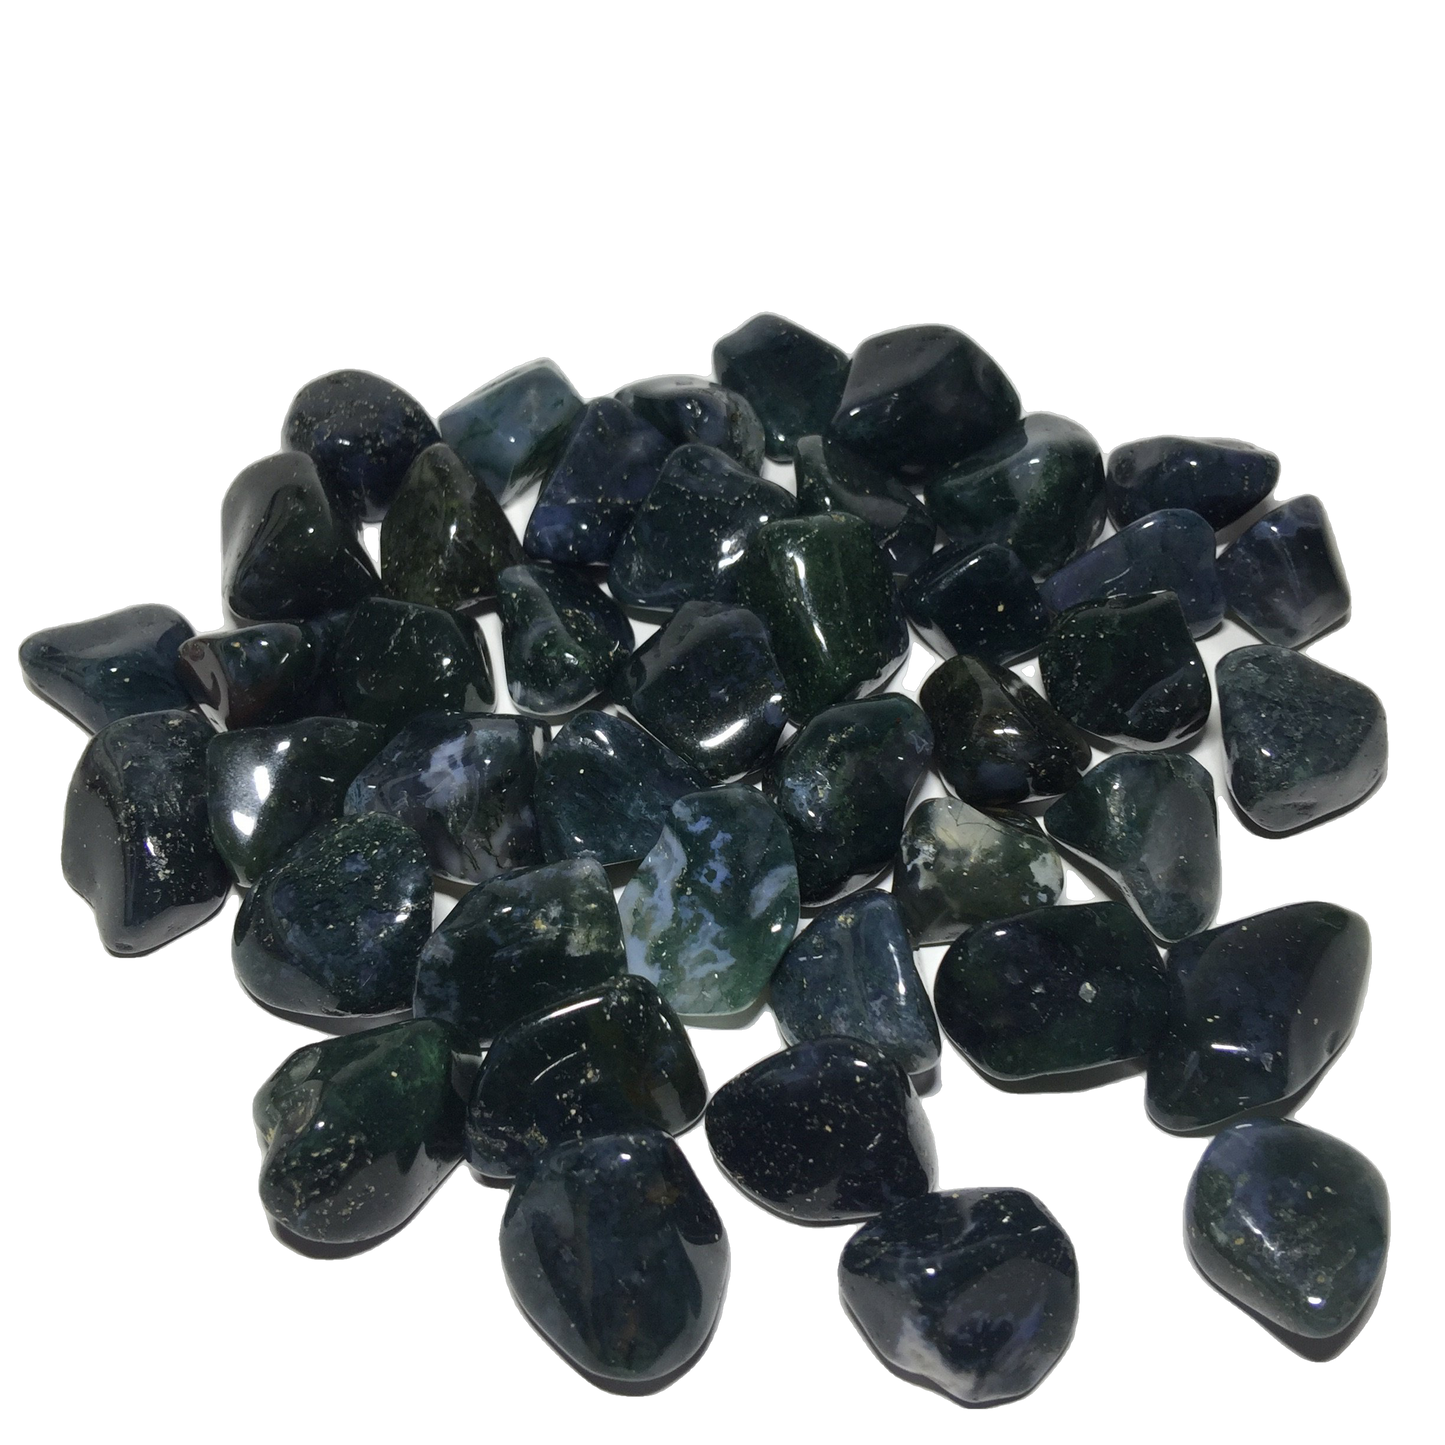 Moss Agate Tumbled - Crystal Geological